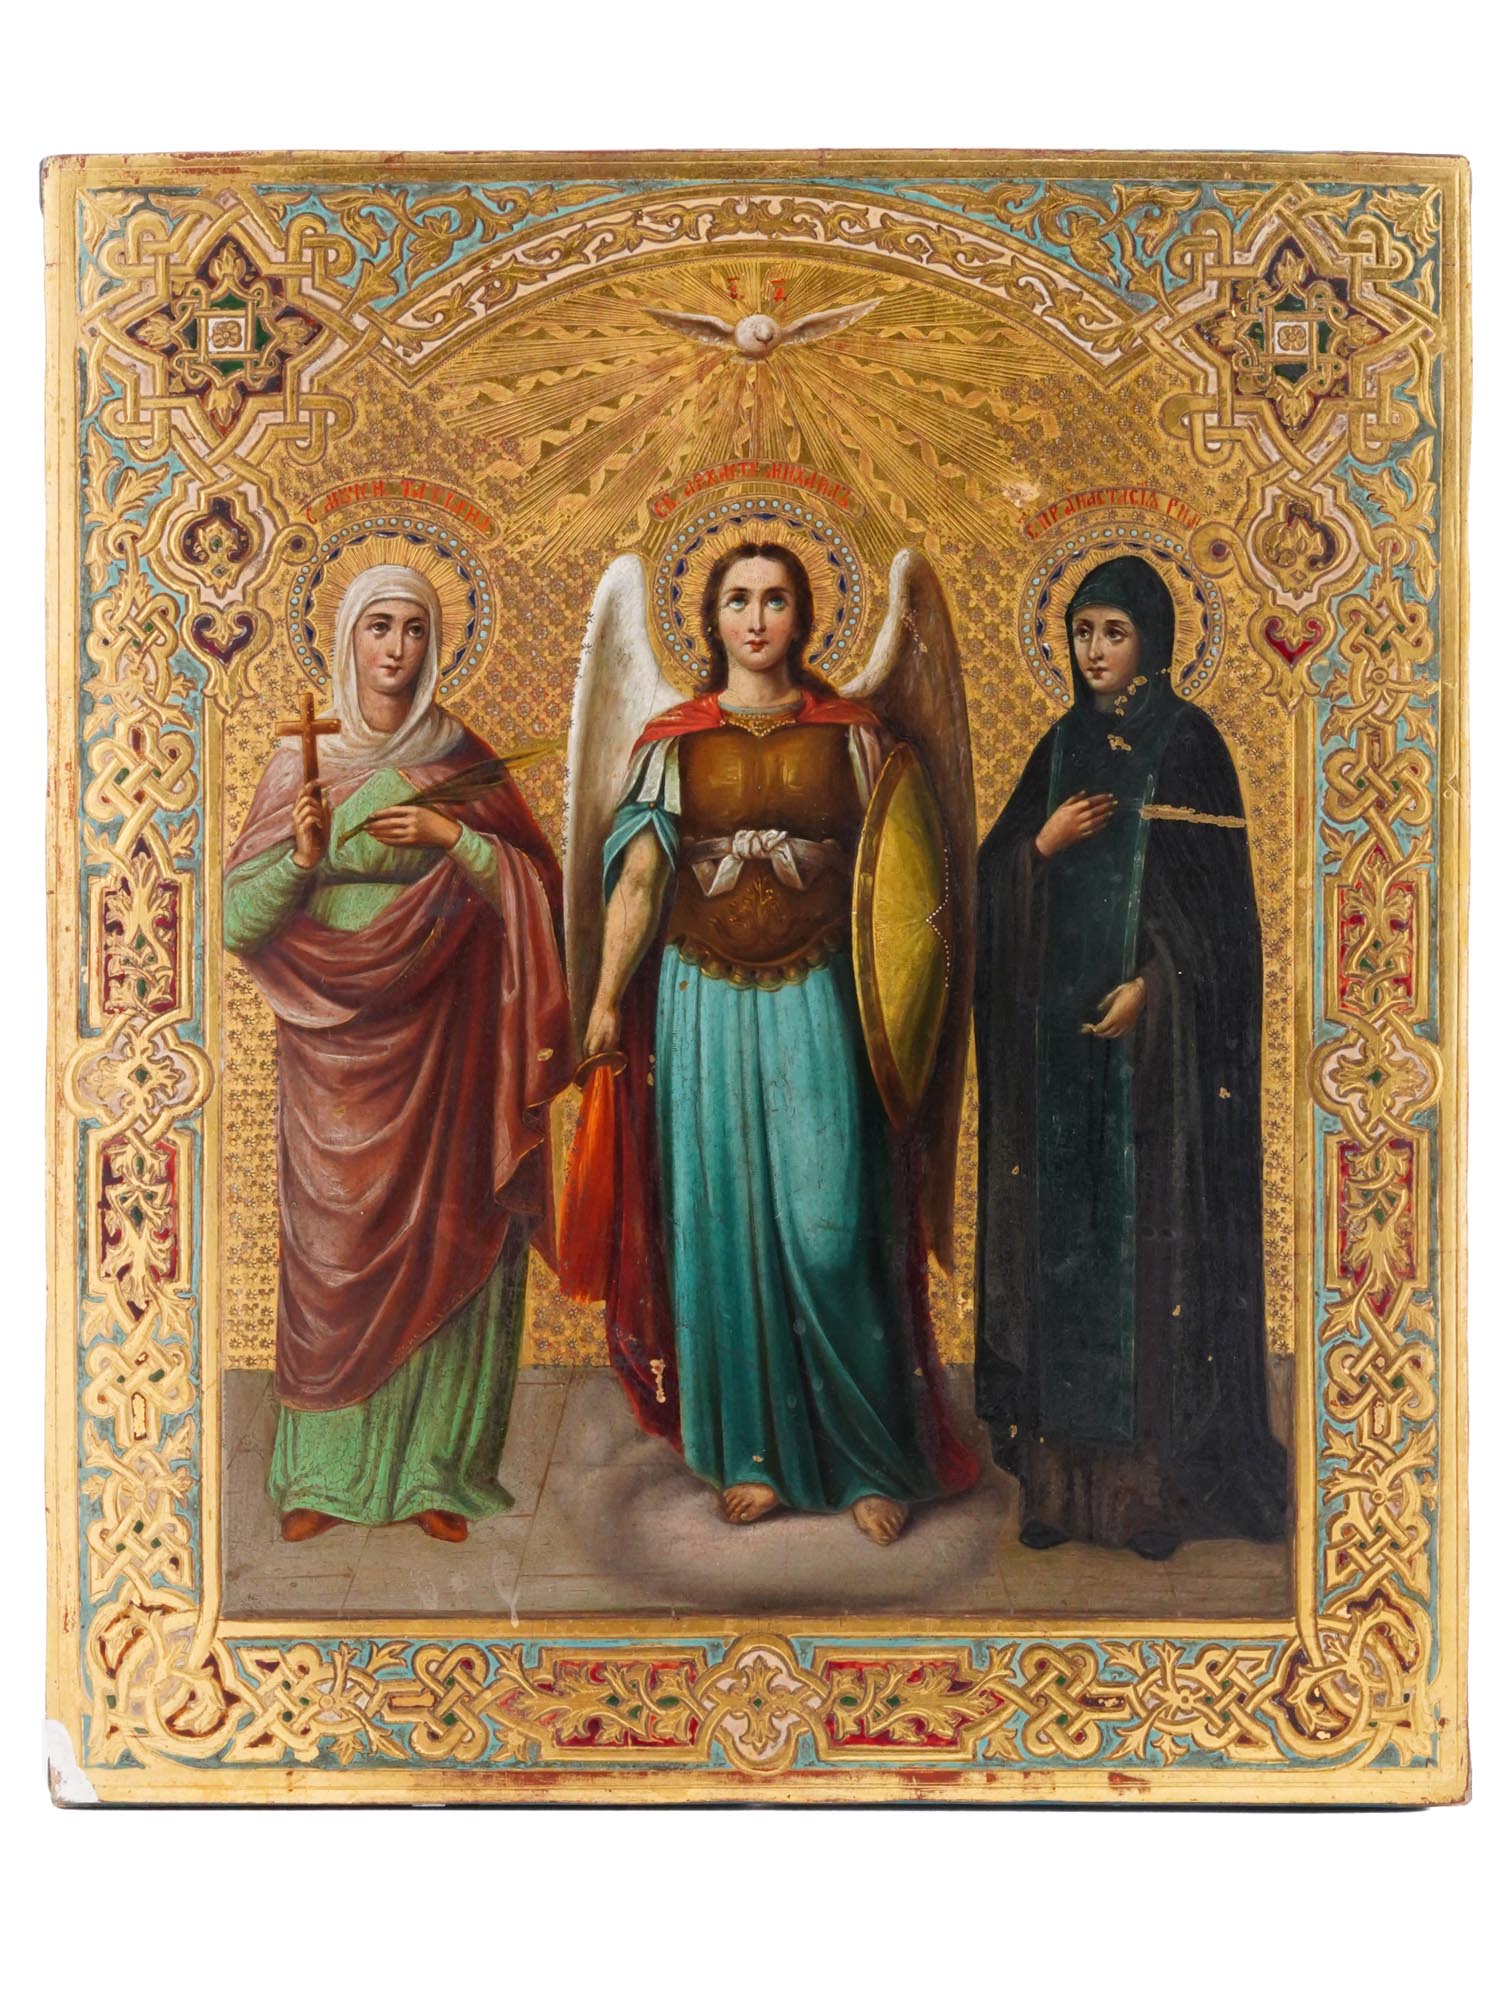 RUSSIAN ICON OF MICHAEL THE ARCHANGEL WITH SAINTS PIC-0